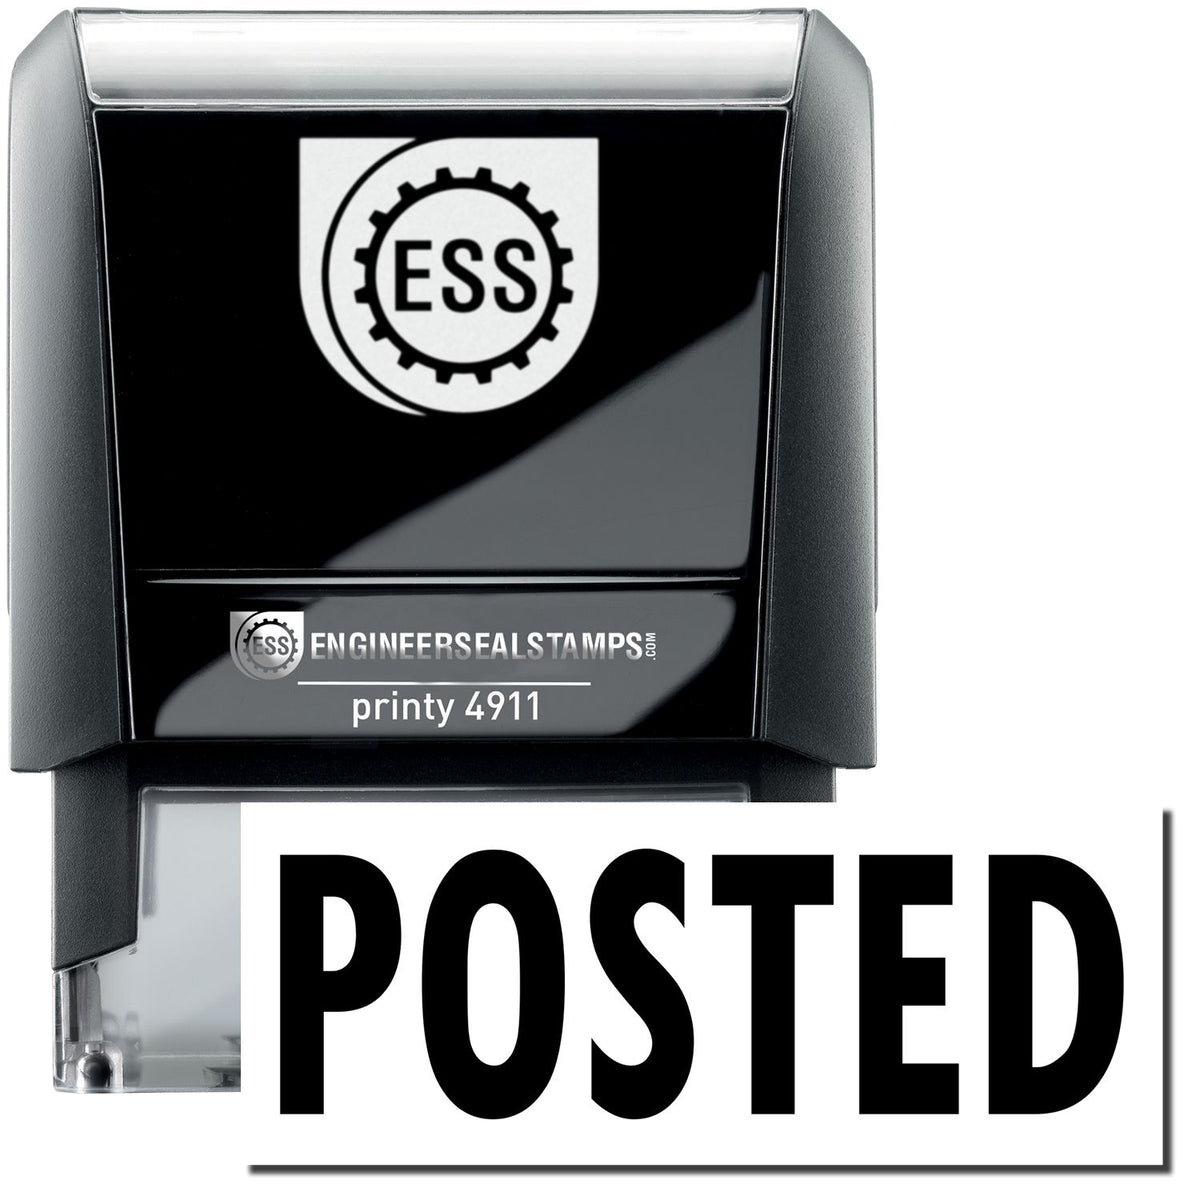 A self-inking stamp with a stamped image showing how the text &quot;POSTED&quot; is displayed after stamping.